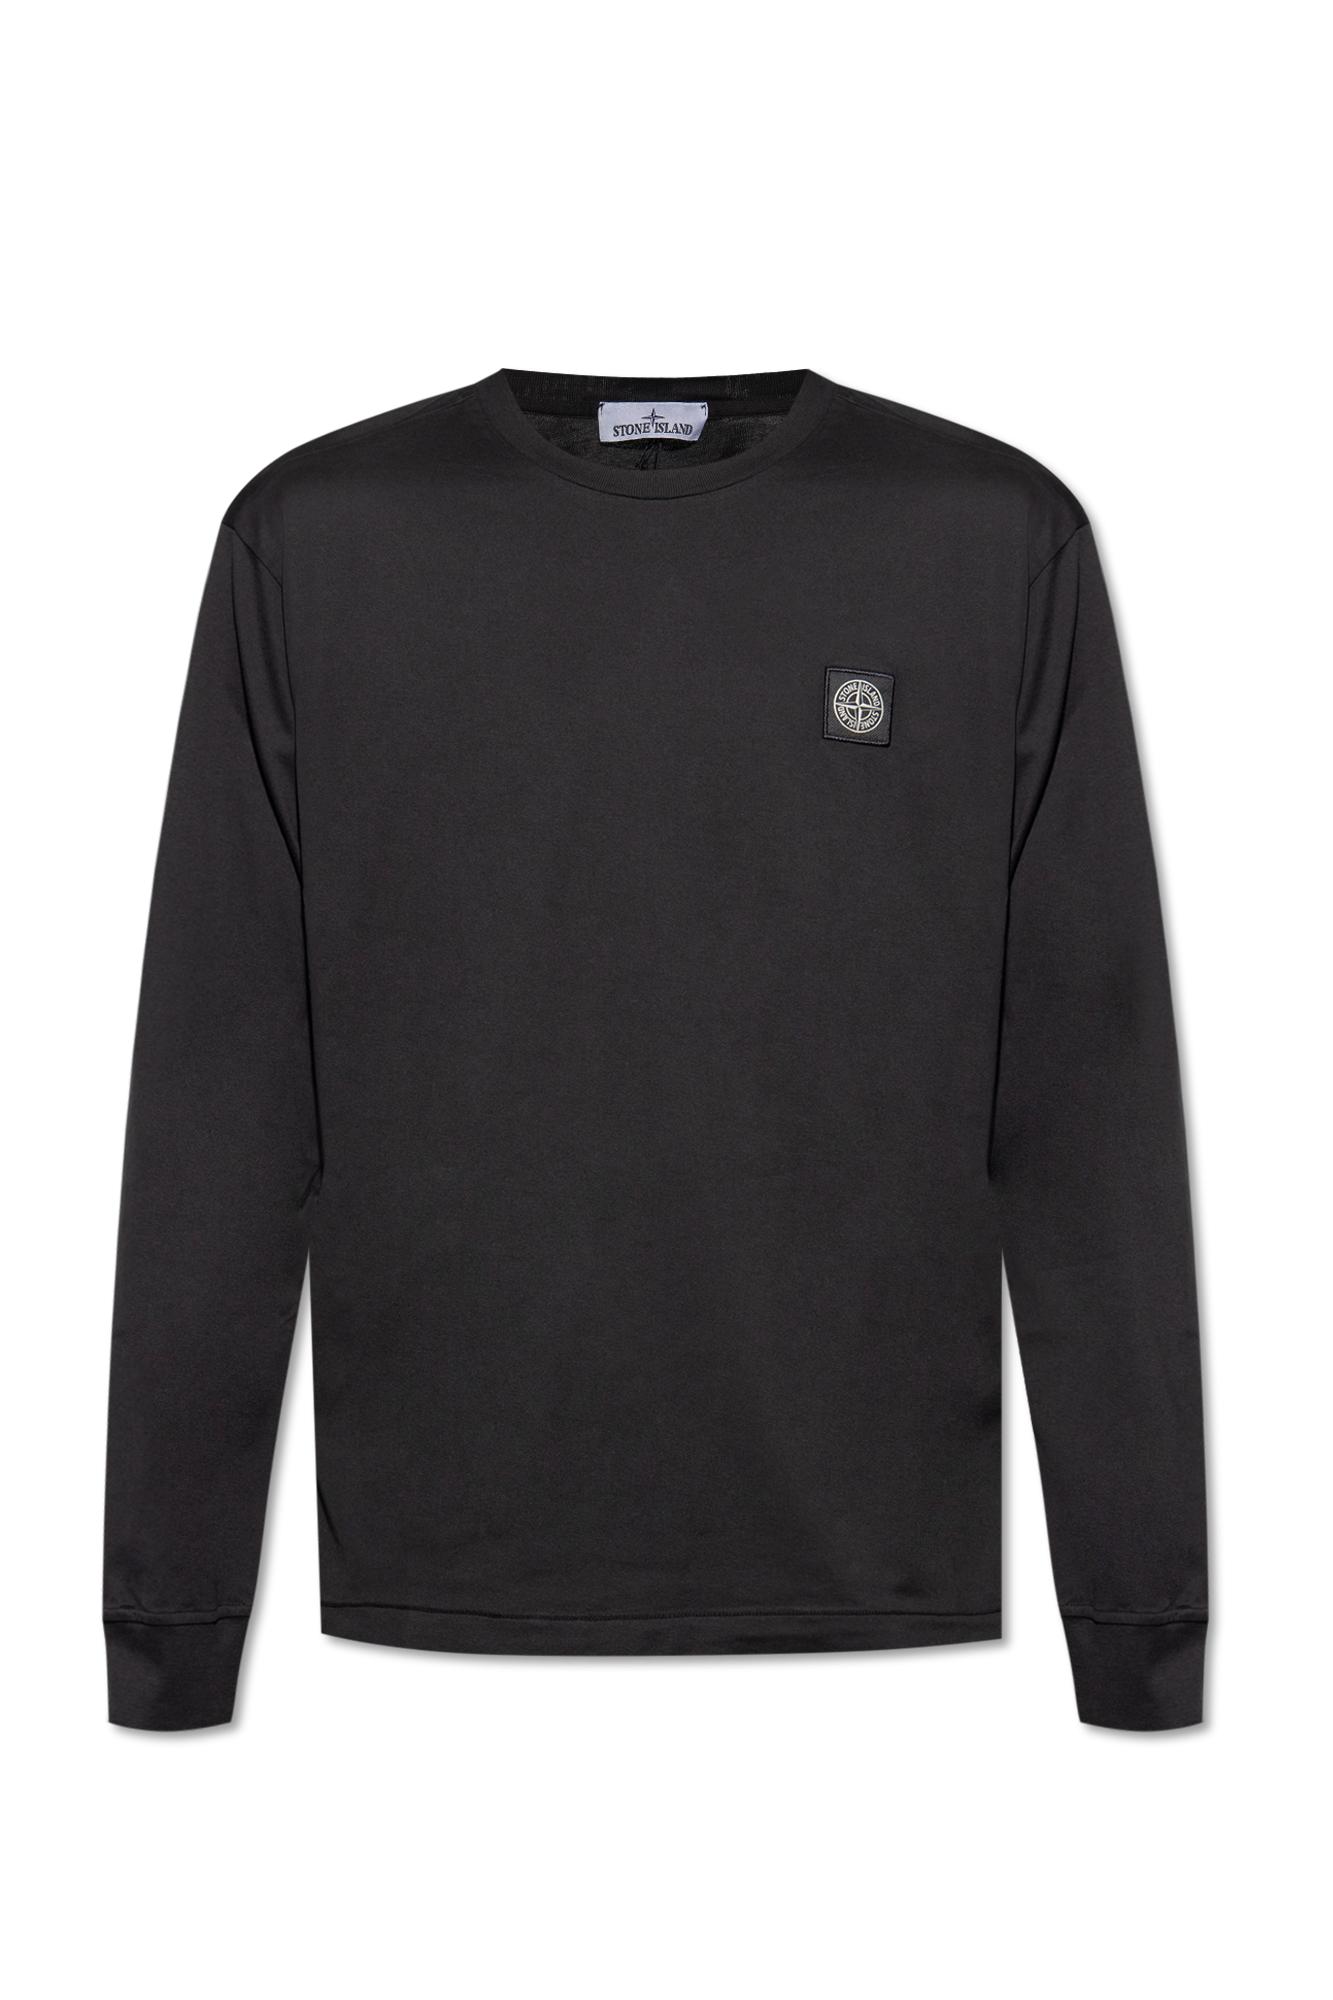 Stone Island T-shirt With Long Sleeves in Black for Men | Lyst